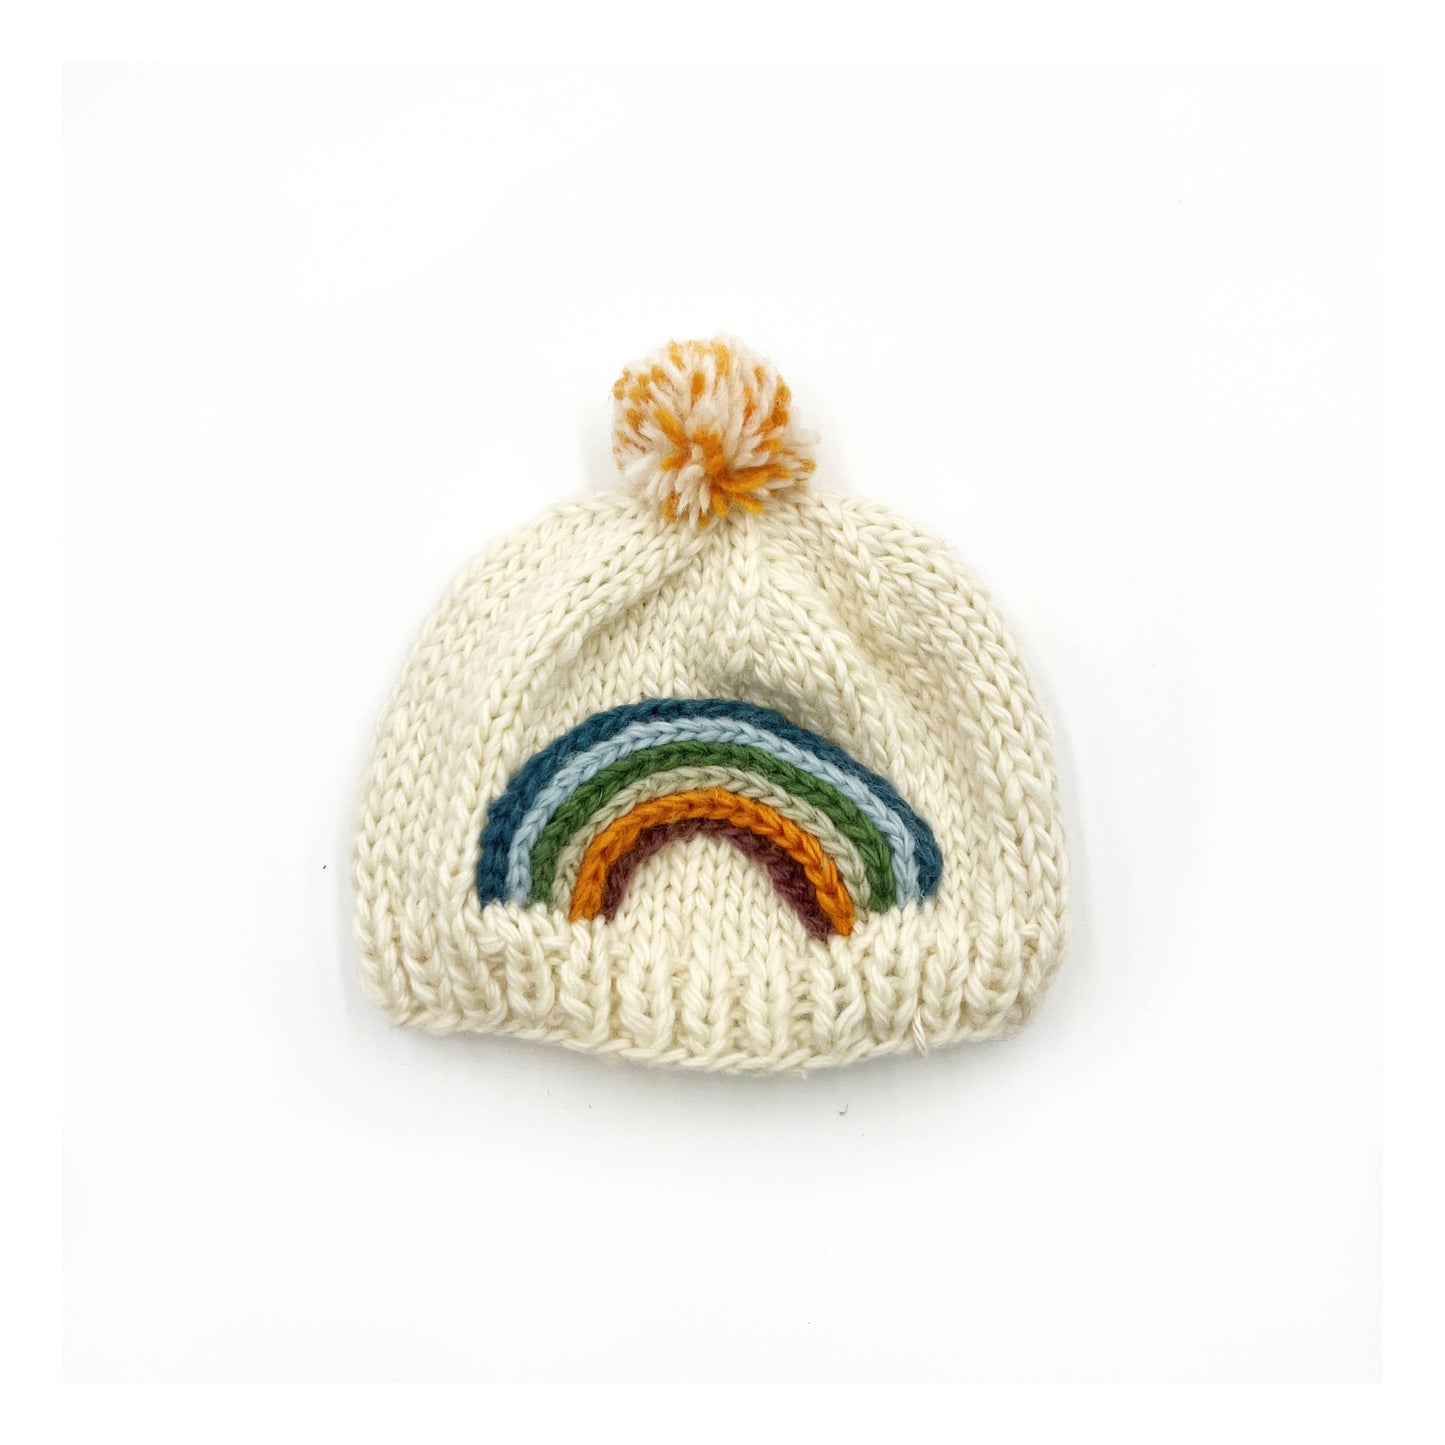 Thick, chunky woollen baby winter hat, by Pebble Child, made from 100% New Zealand merino wool in cream colour, with a knitted rainbow and a pompom on top.